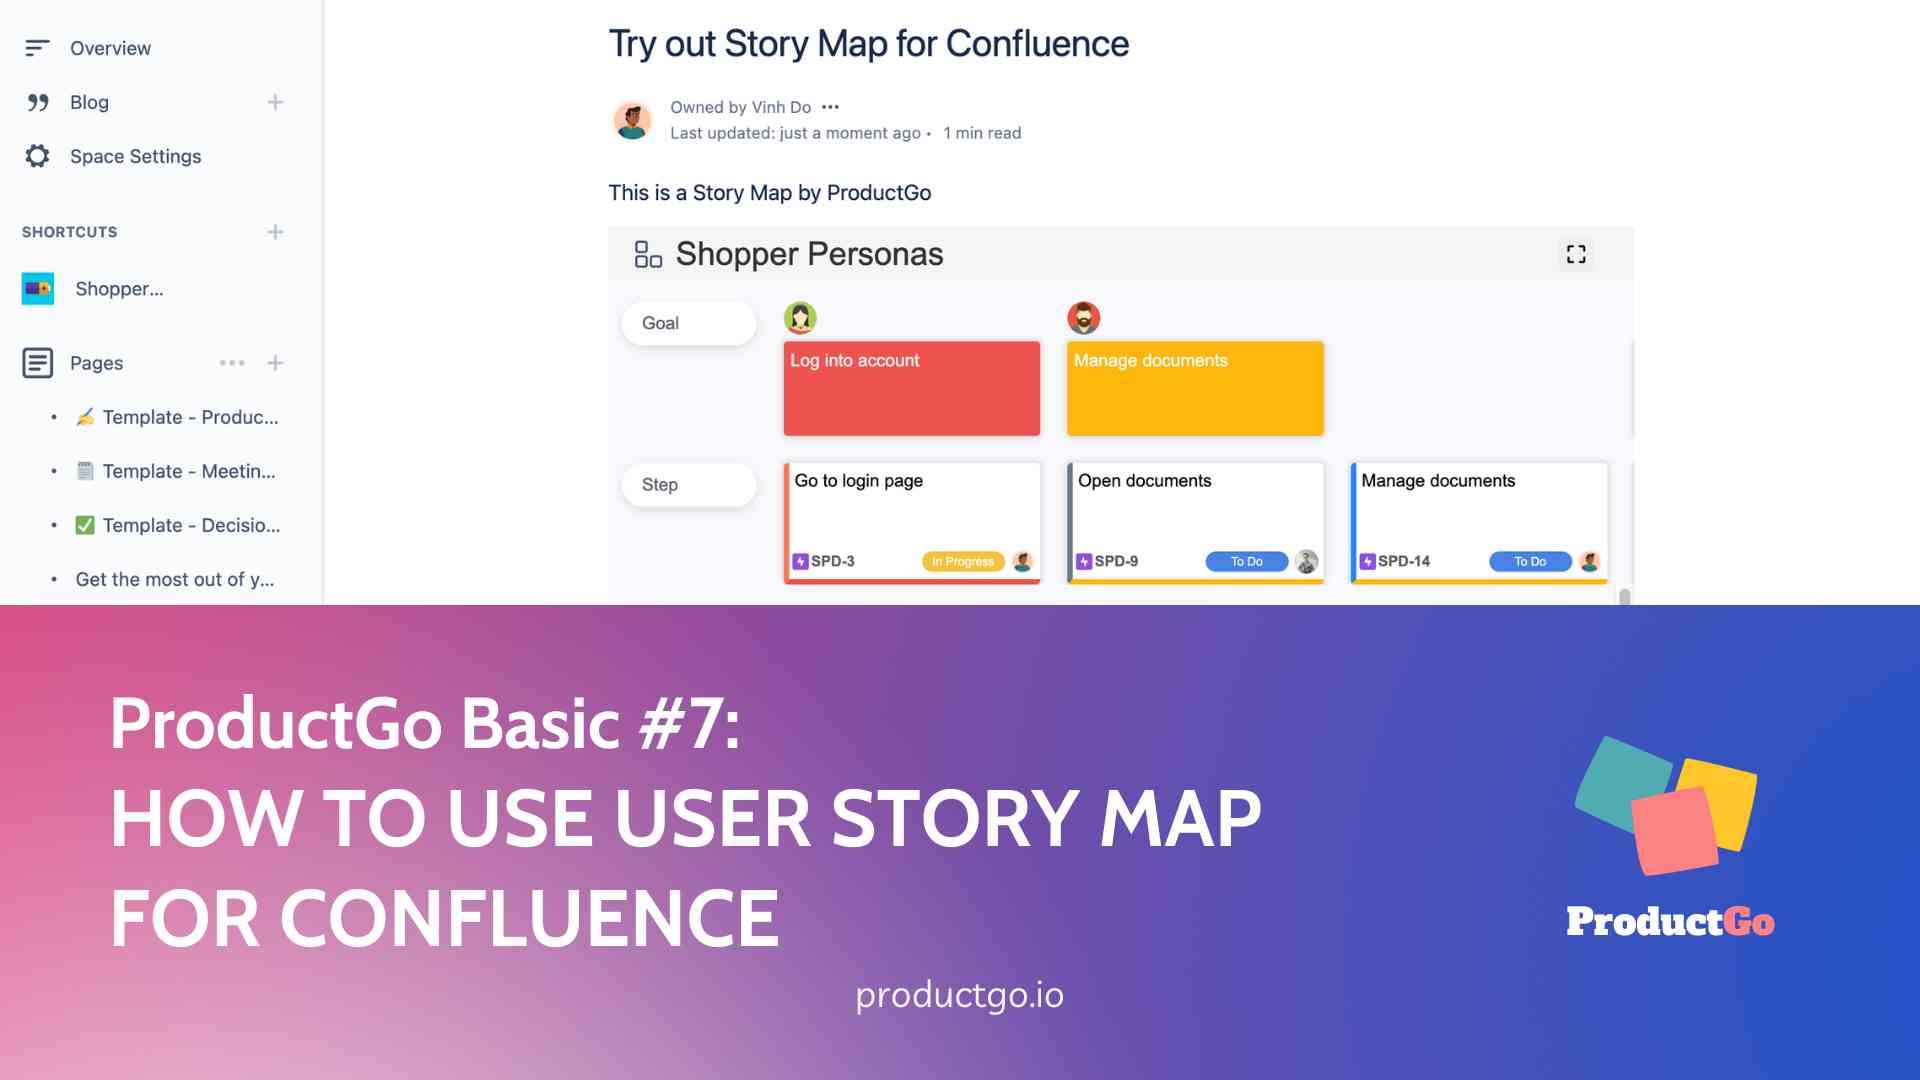 ProductGo Basic #7 how to use user story map for confluence